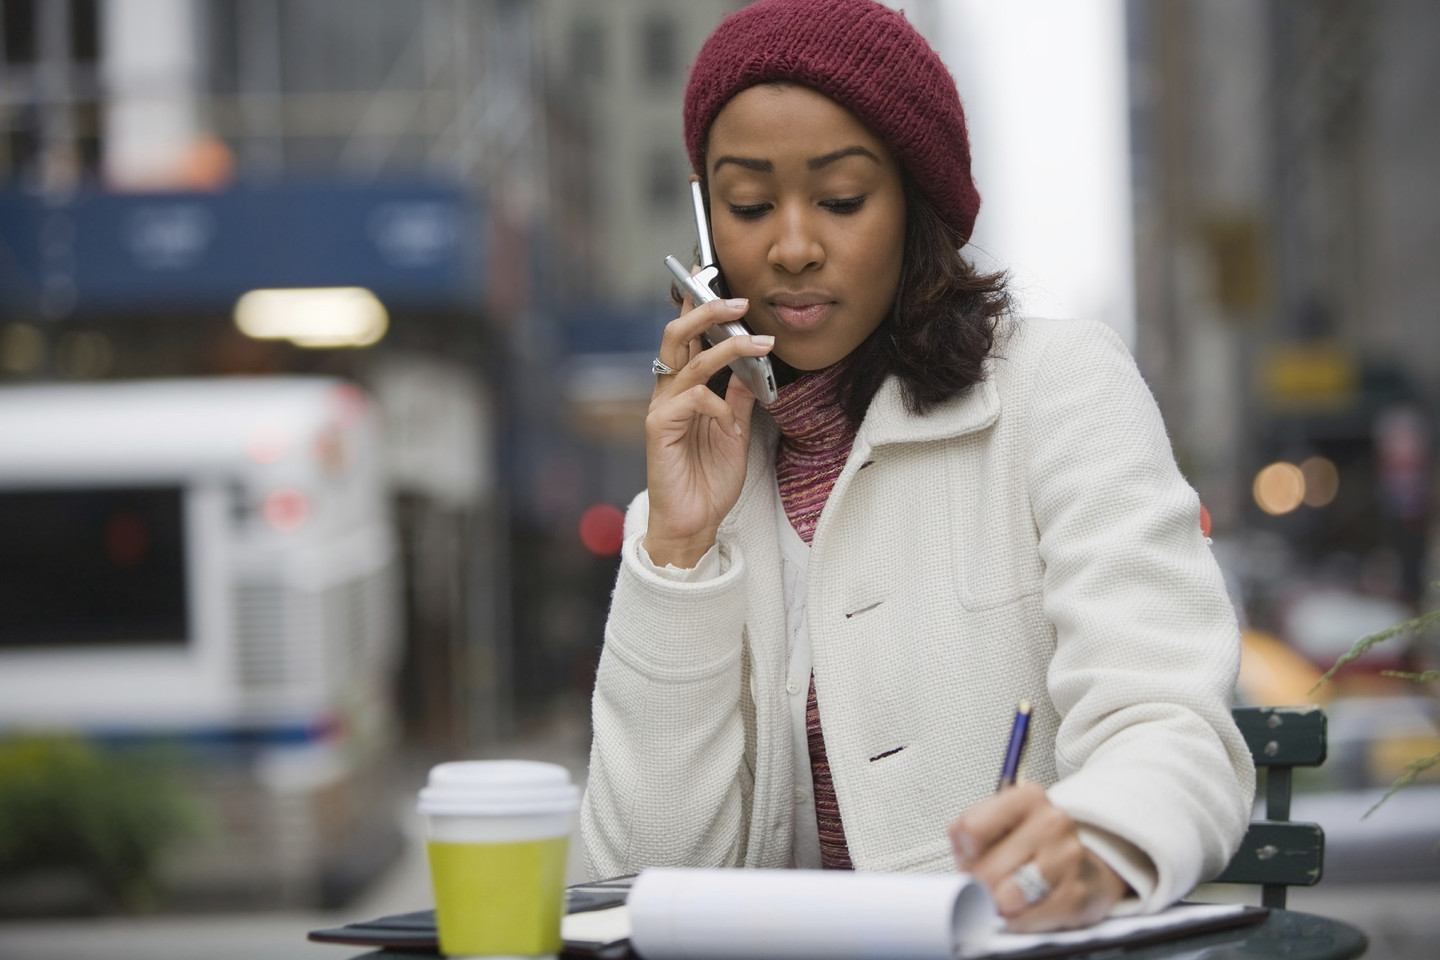 A person in a white coat and red beret sits at an outdoor table on the phone, writing on a notepad.